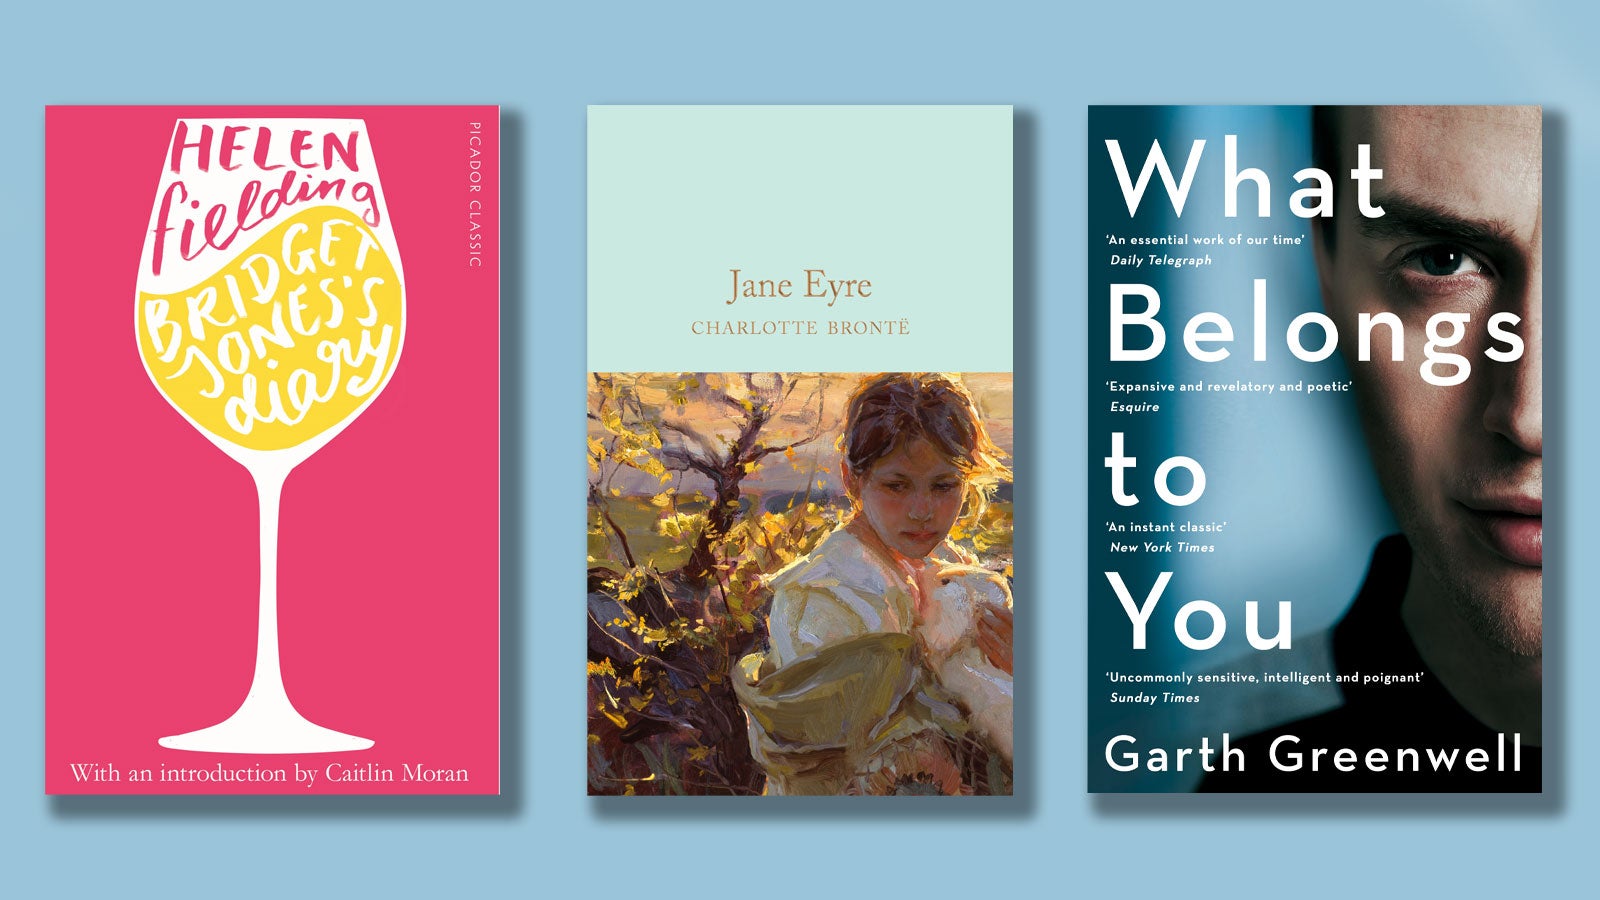 Bridget Jones's Diary, Jane Eyre and What Belongs to You book covers